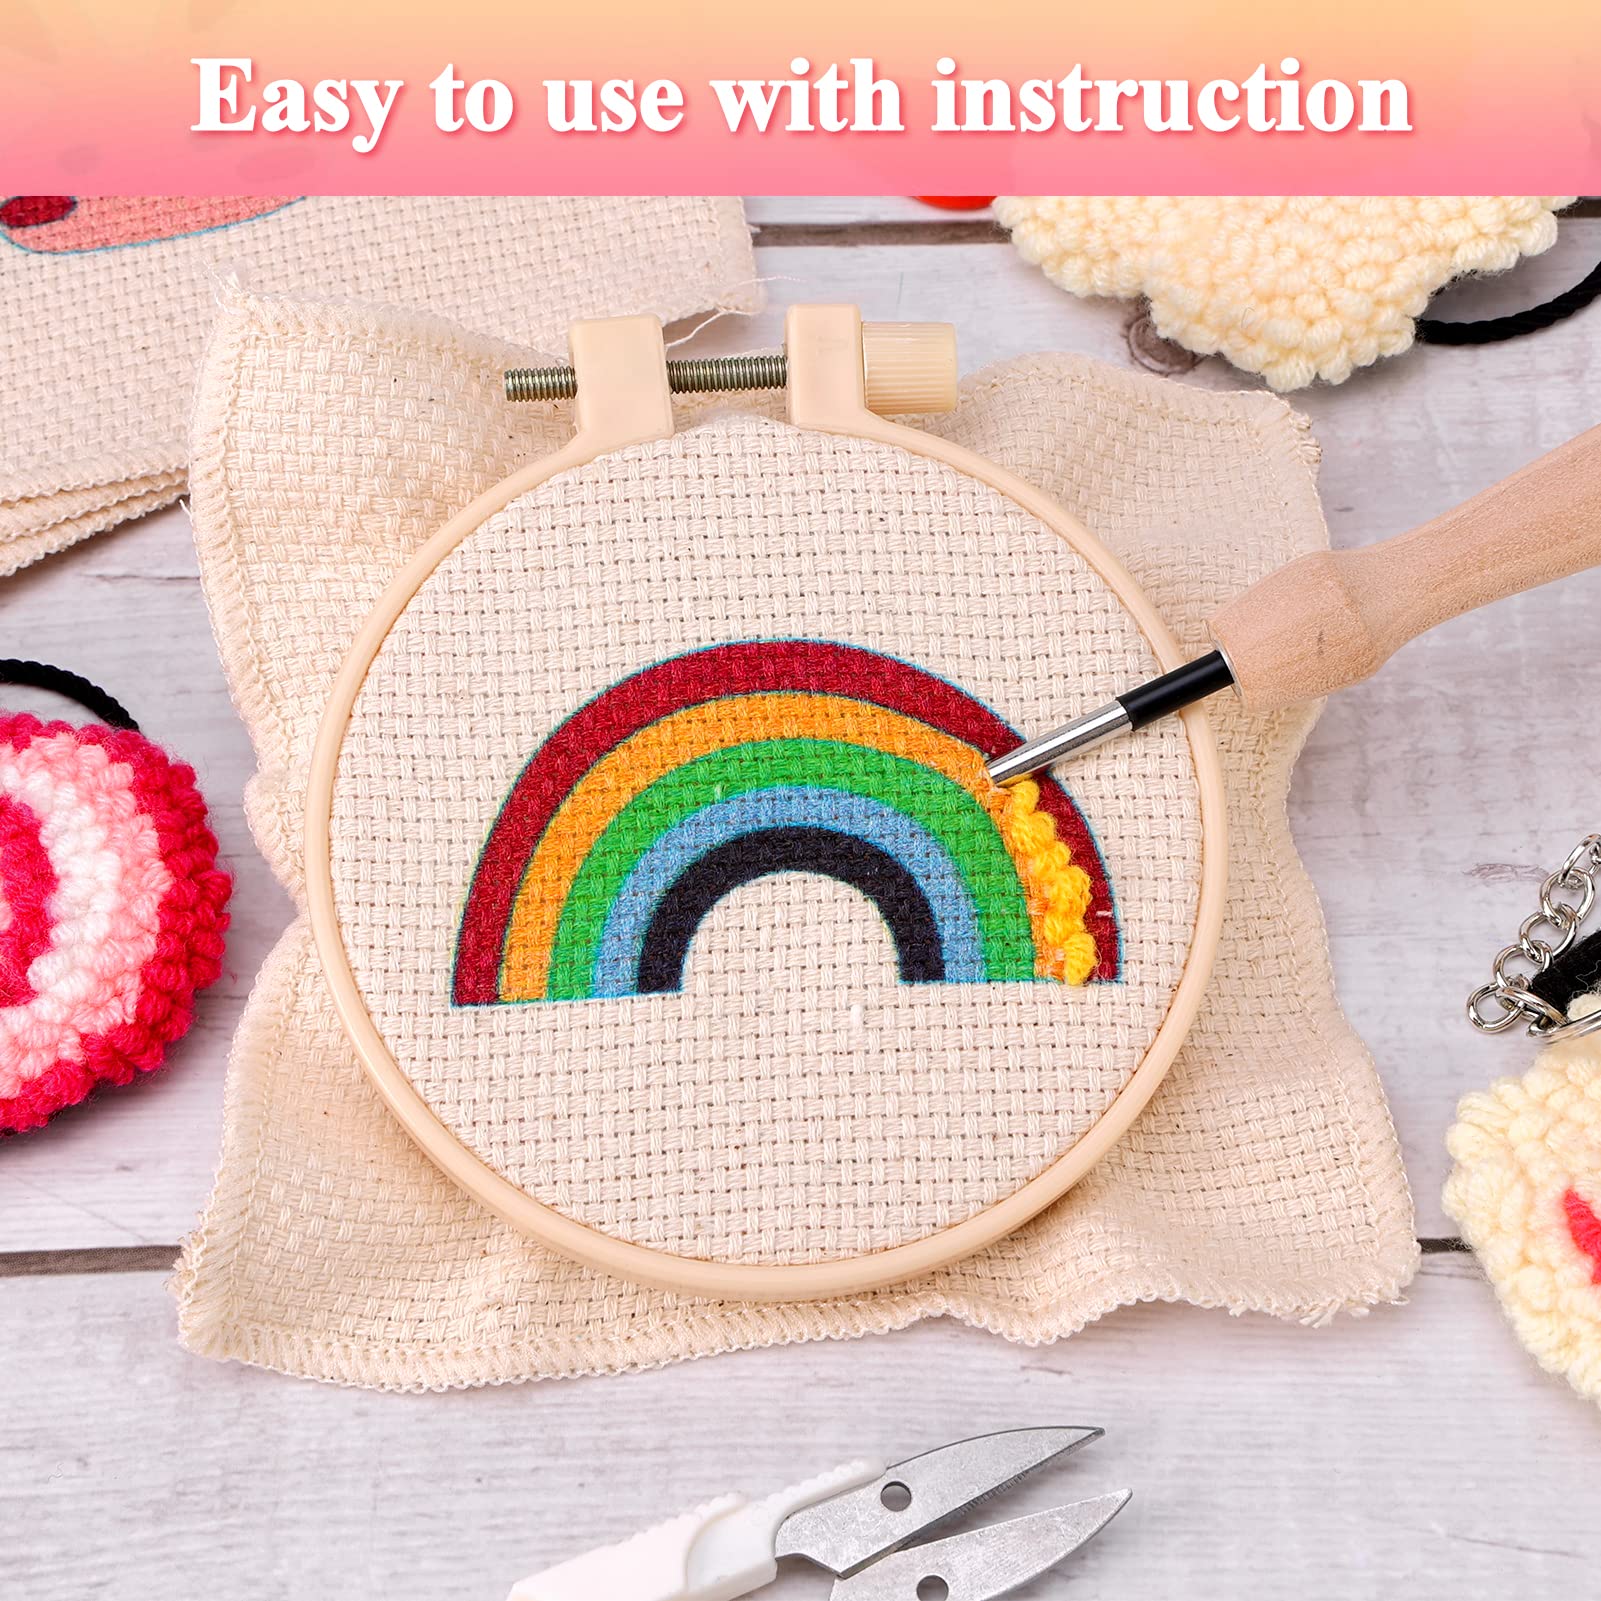  Pllieay Punch Needle Embroidery Starter Kits for Kids and  Adults Beginners, Include Instructions, Punch Needle Fabric with Floral  Pattern, Yarns, Embroidery Hoops and Threader Tools